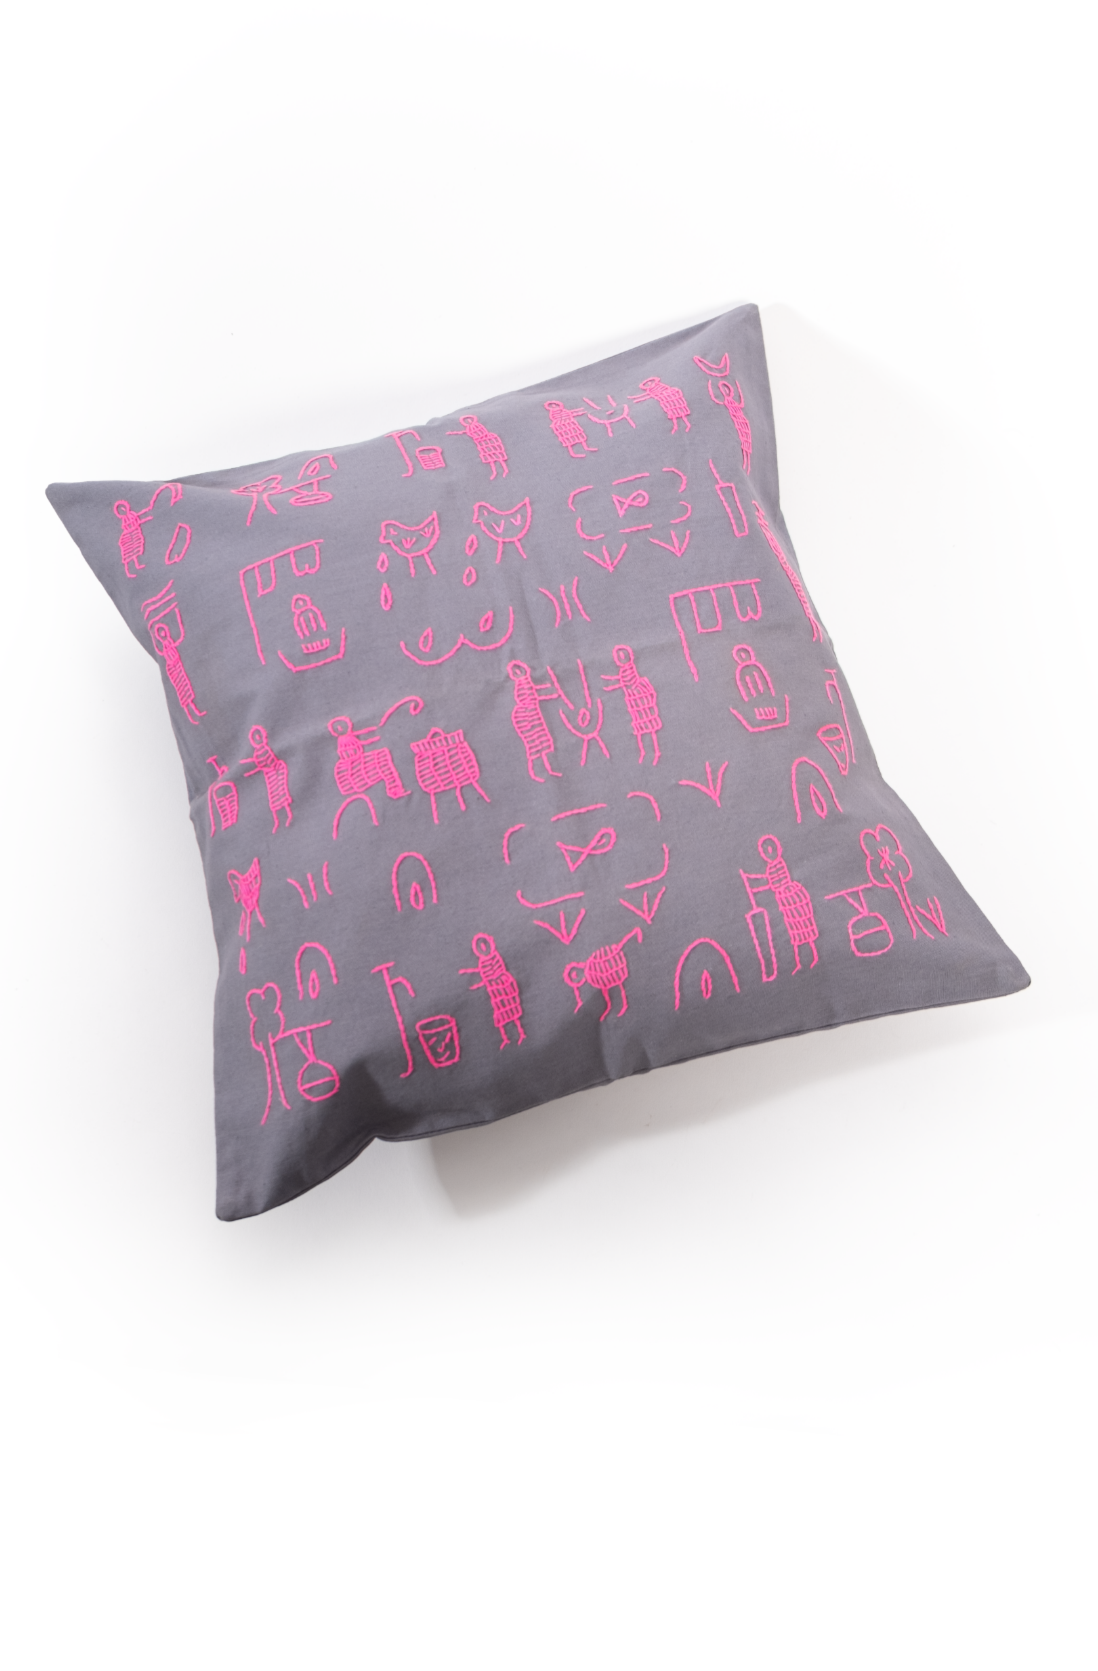 Cushion Cover Embroidered